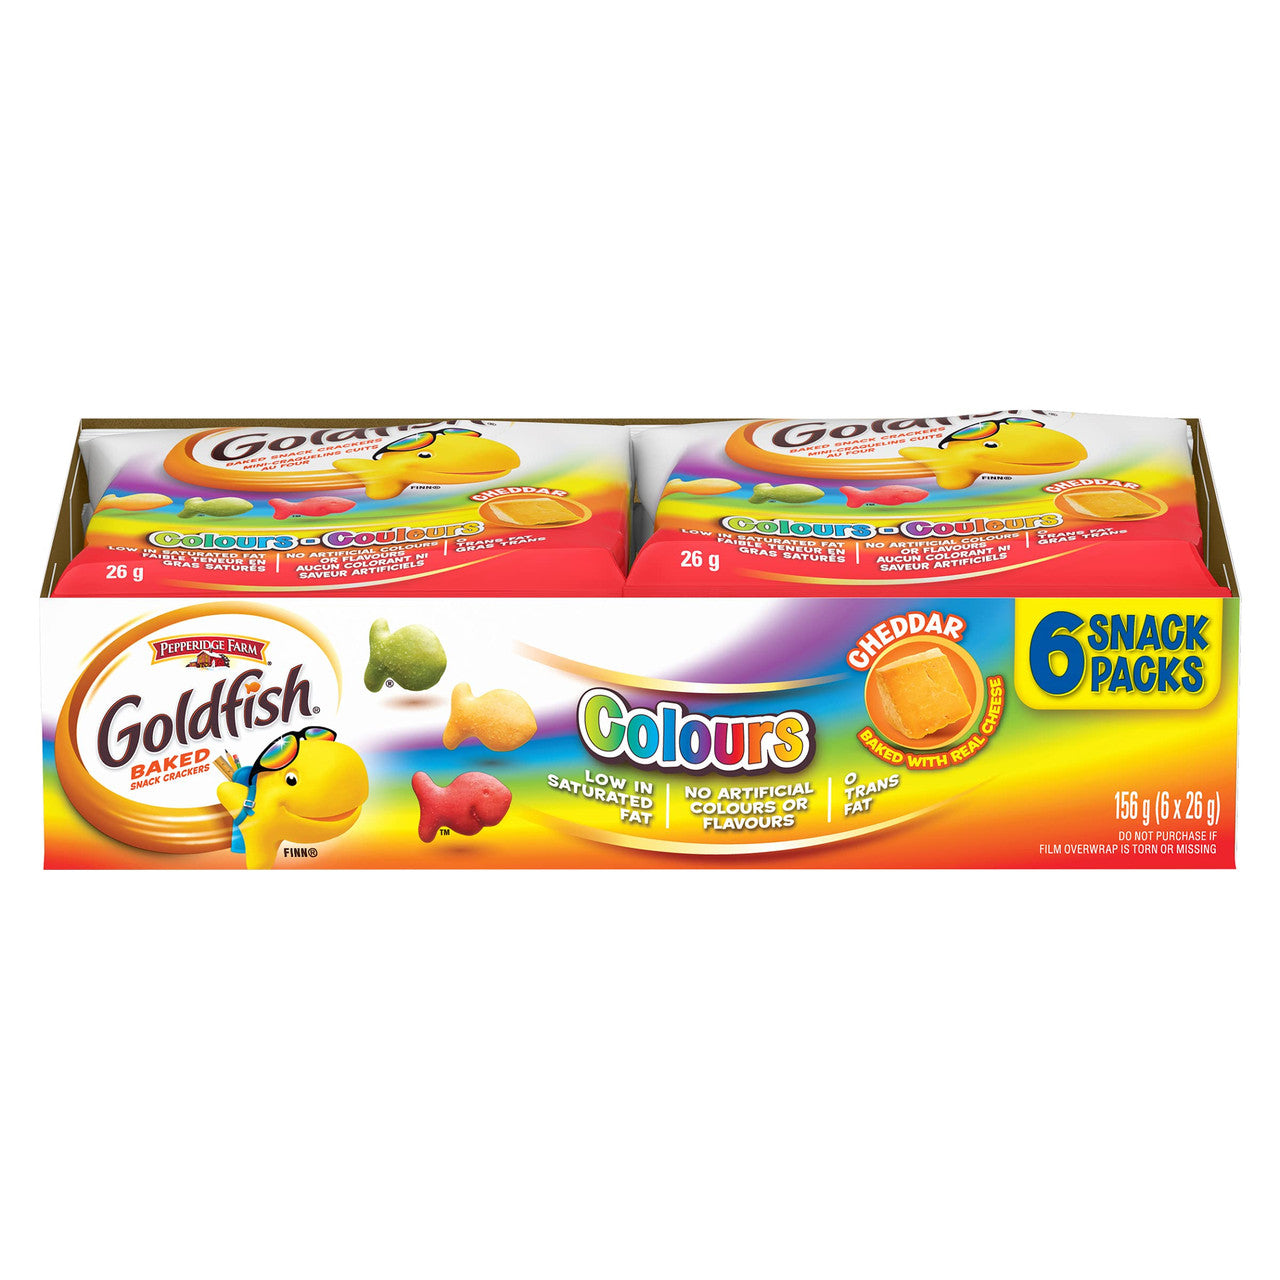 Goldfish Colours Cheddar Crackers, 6 Snack Packs, 26g/0.9 oz. per pack, {Imported from Canada}